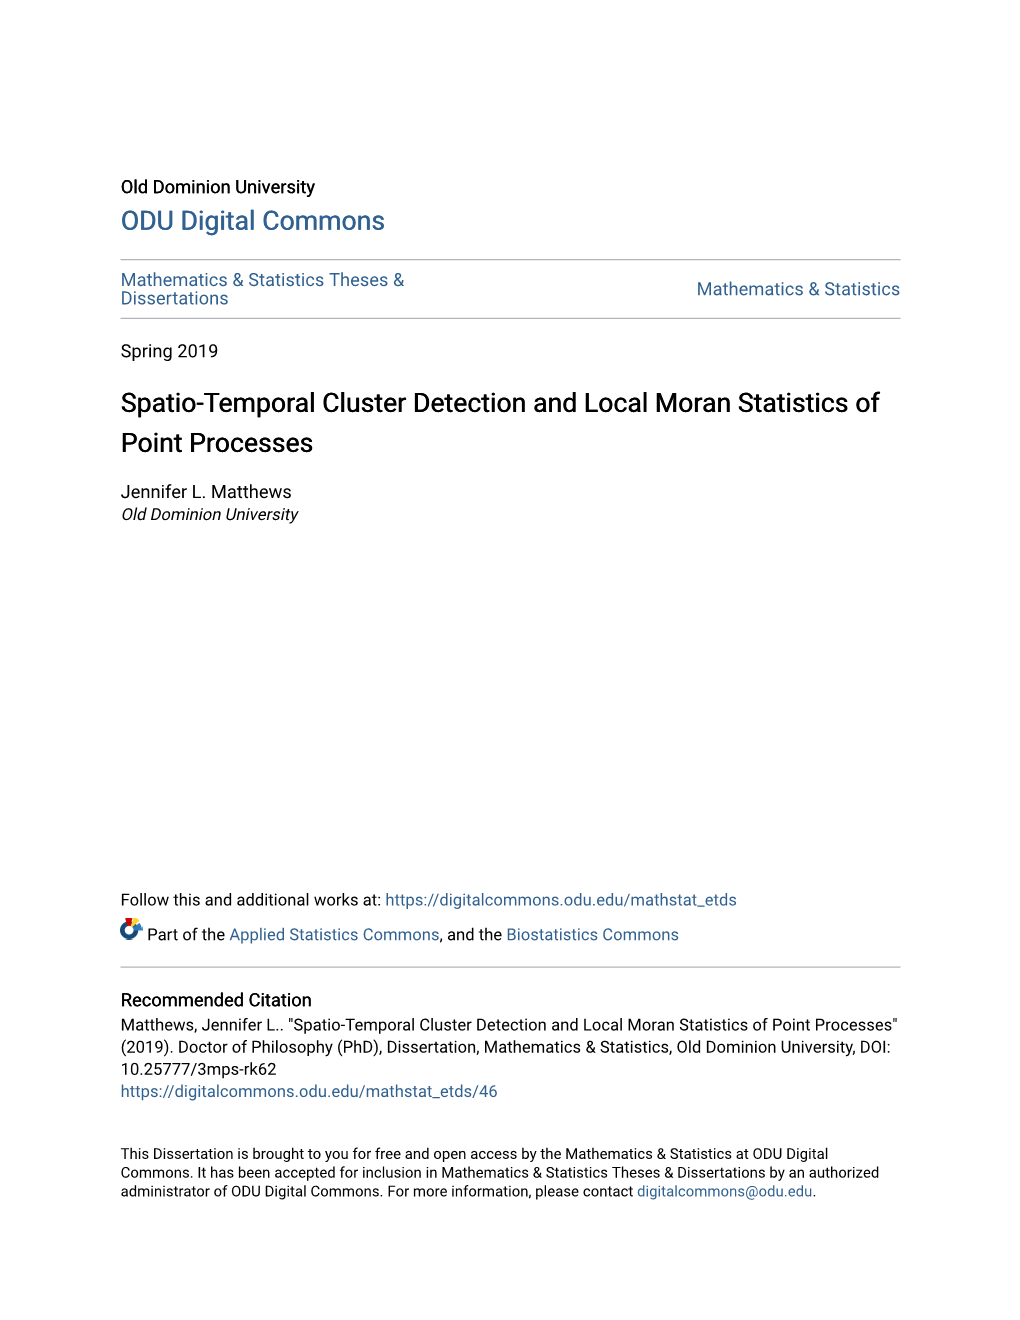 Spatio-Temporal Cluster Detection and Local Moran Statistics of Point Processes